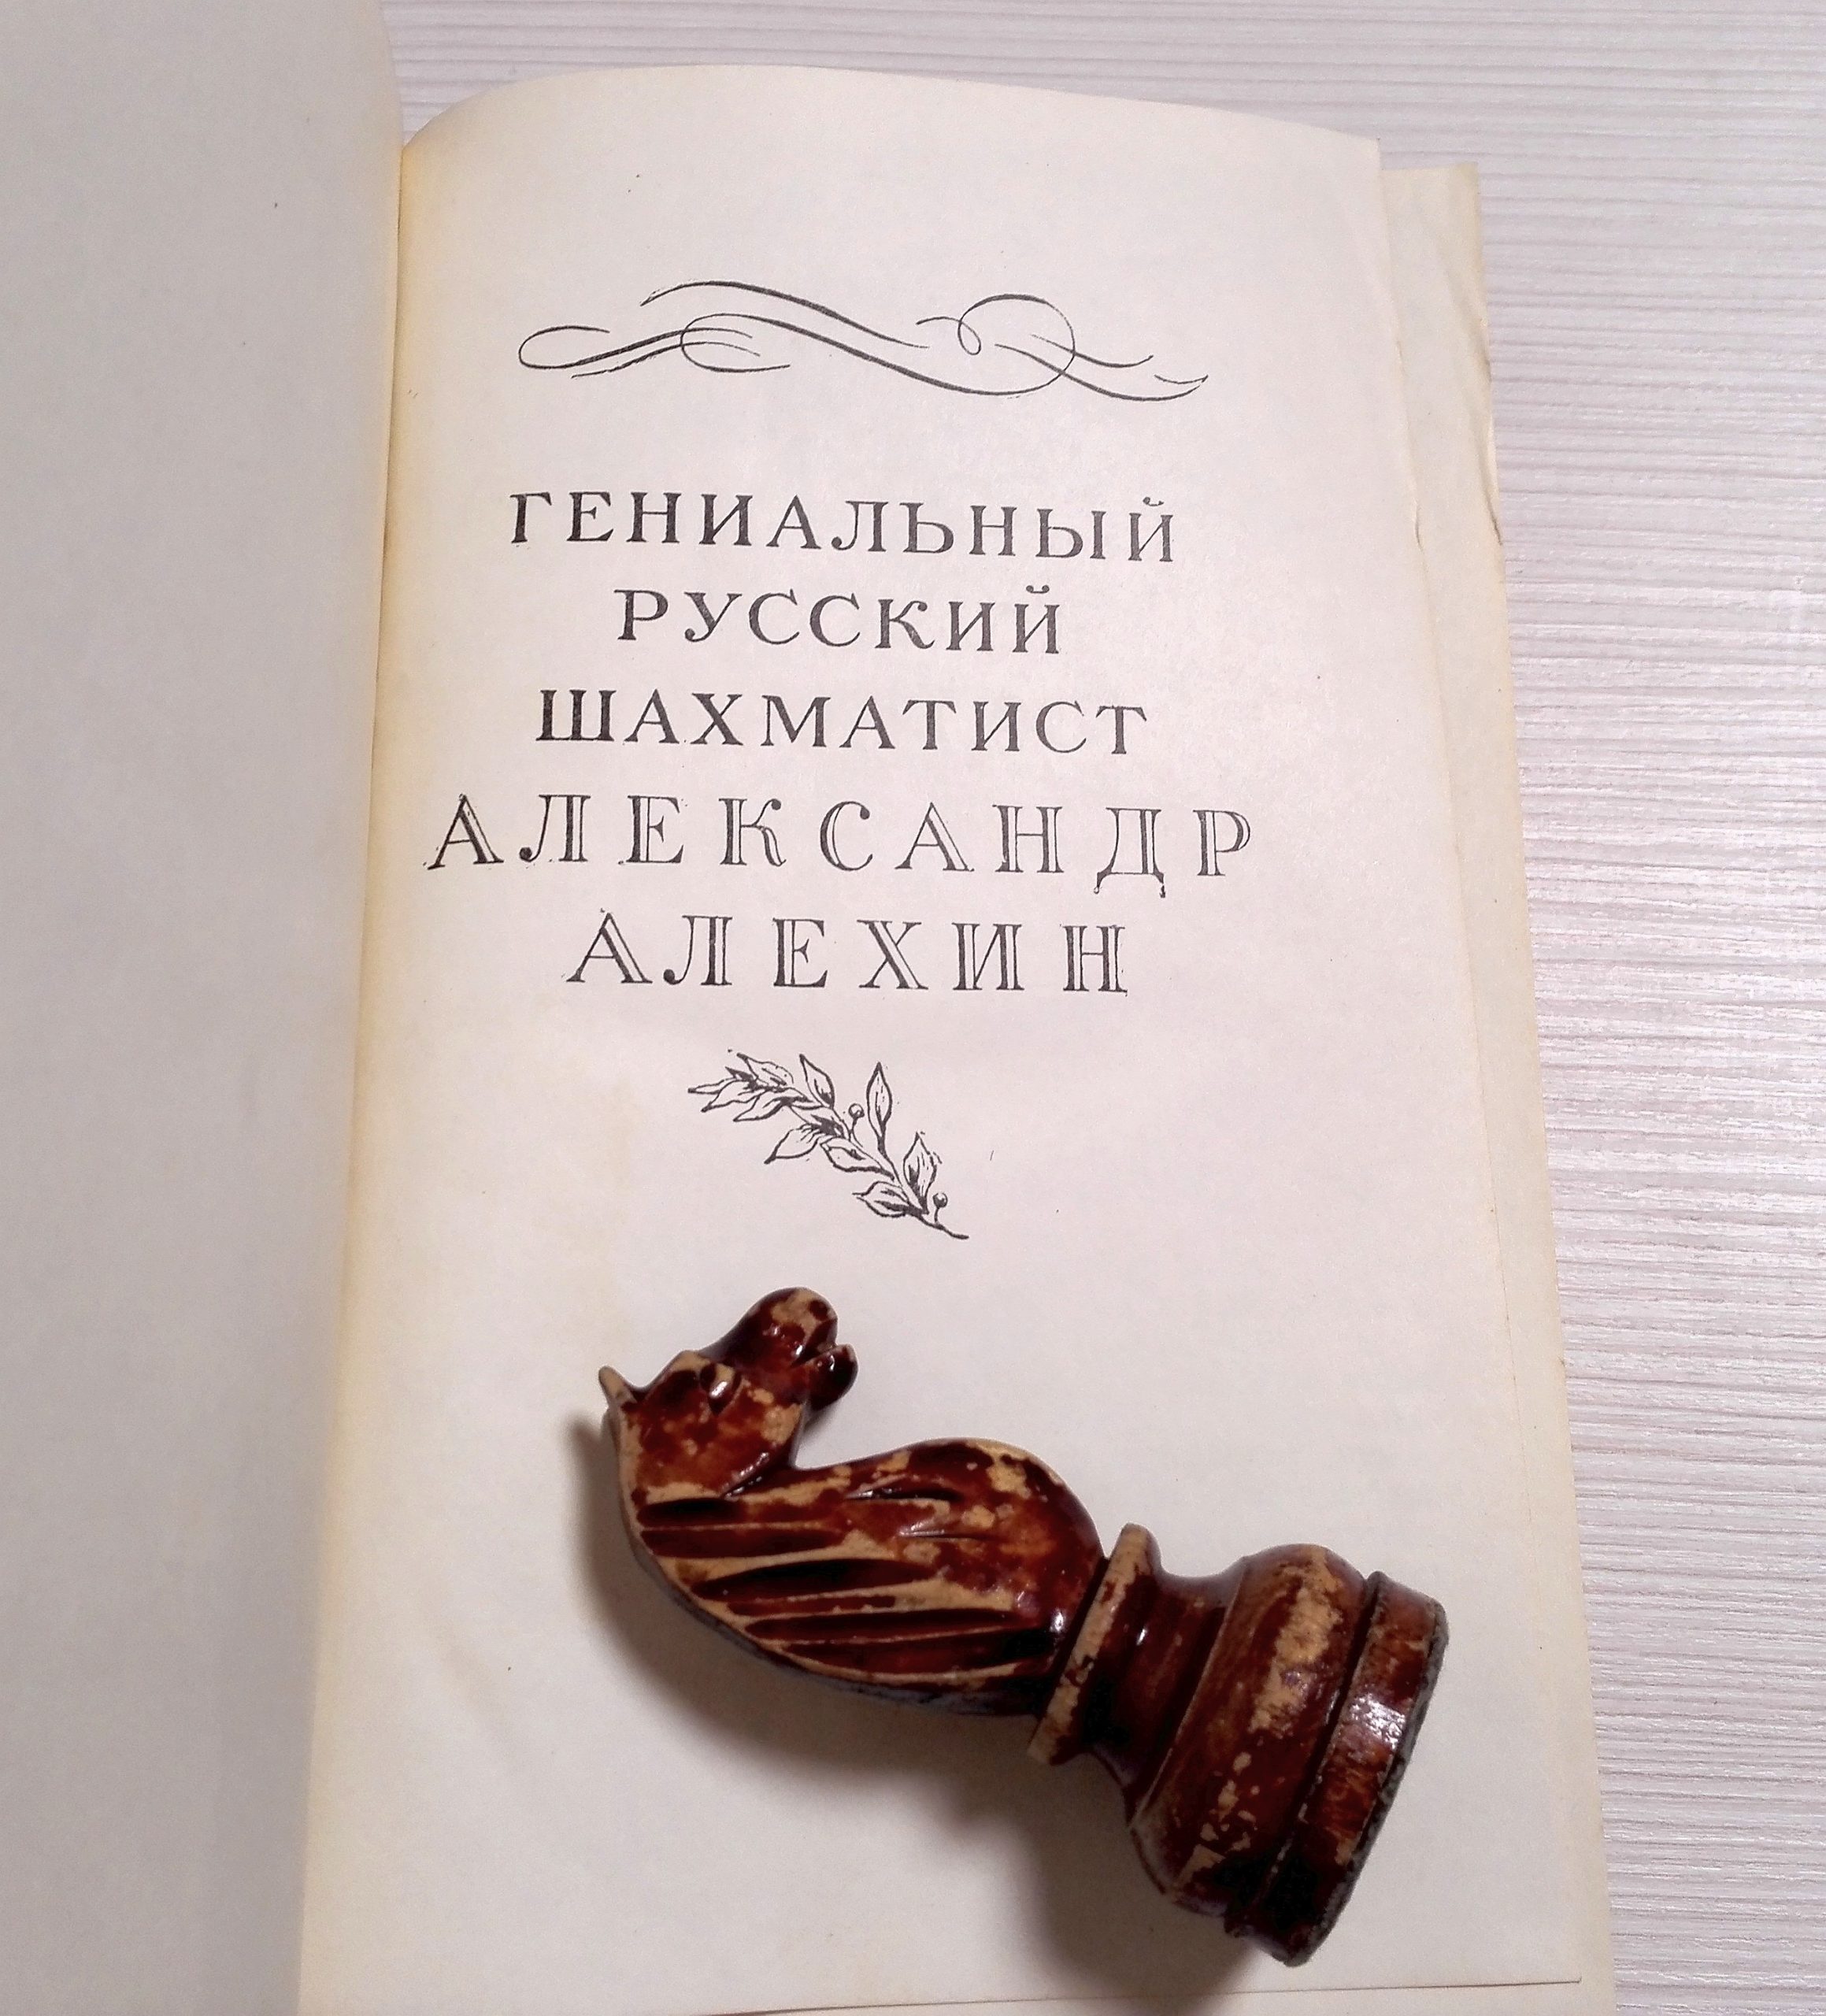 chess literature in russian scaled